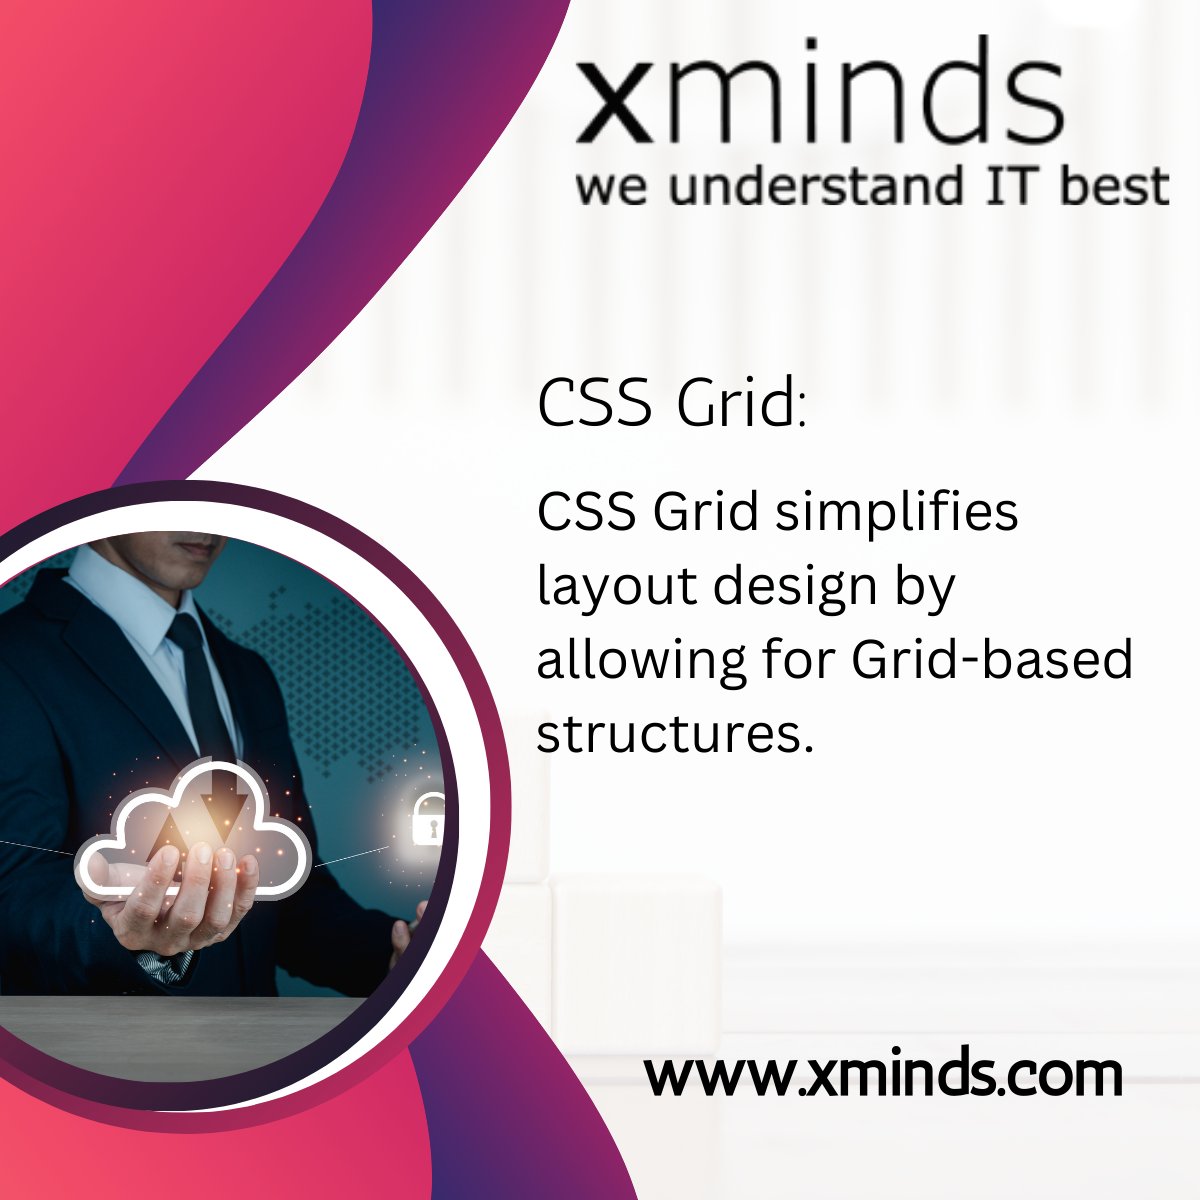 Stay on the cutting edge of front-end tech! 💻 Master React Hooks for cleaner code, dive into CSS Grid for stunning layouts and level up with Vue 3 for dynamic web apps. Keep learning and stay ahead! 🚀

#FrontendTech #WebDev #AlwaysLearning #xminds